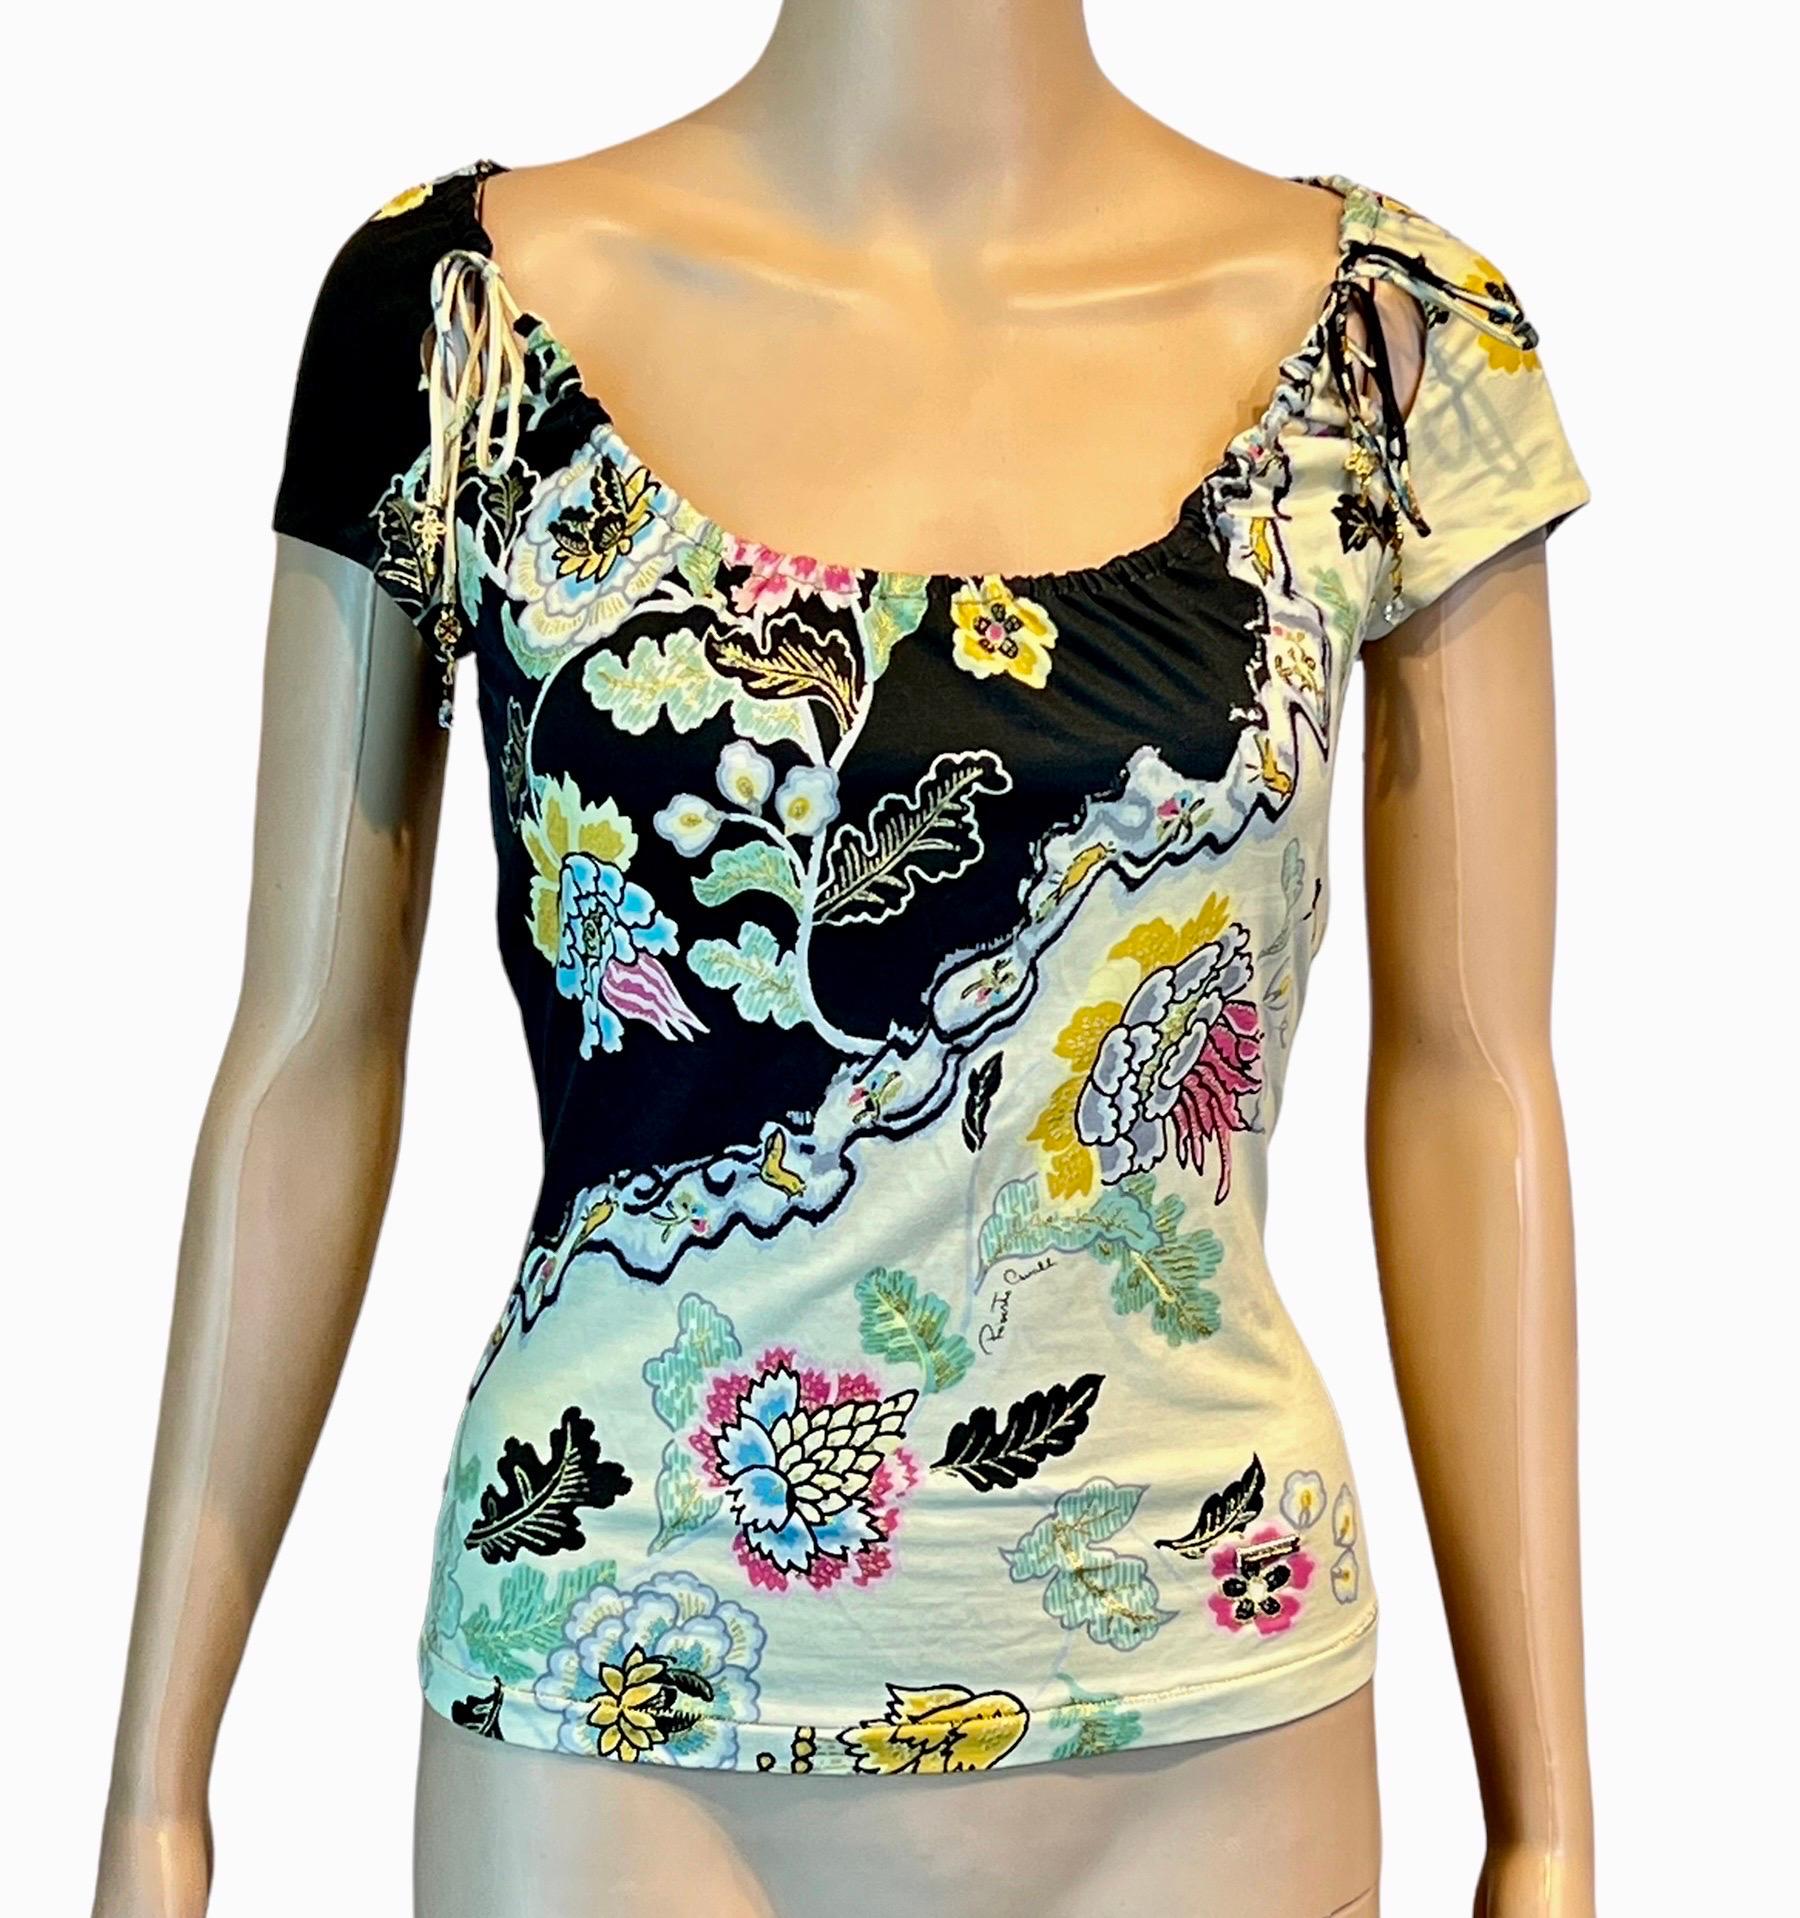 Women's Roberto Cavalli S/S 2003 Chinoiserie Print Cutout Blouse Top For Sale